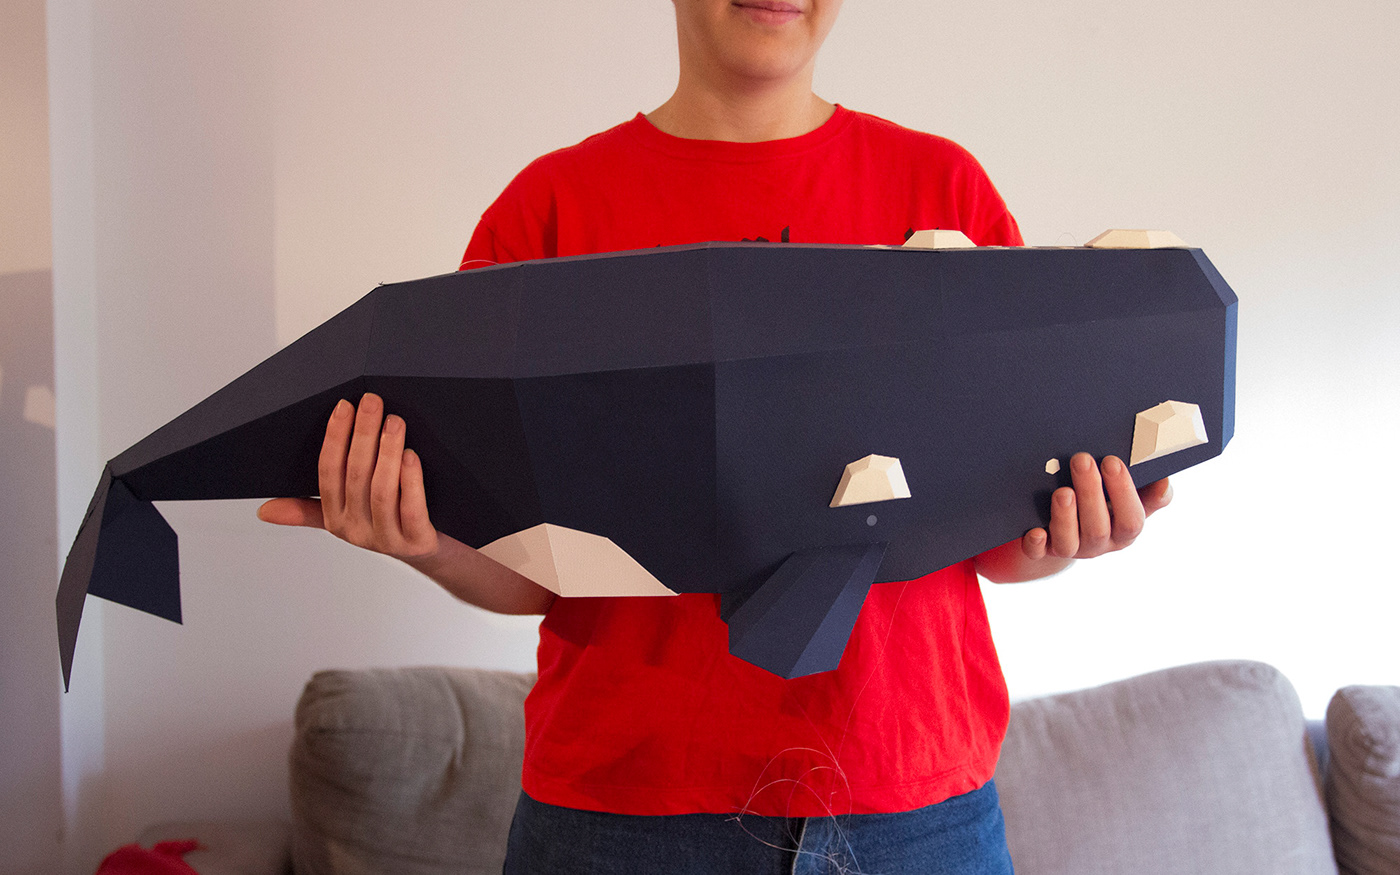 papercraft lowpoly paperwhales dolphin humpbackwhale papertoys paperkits DIY orca ballenafrancaaustral